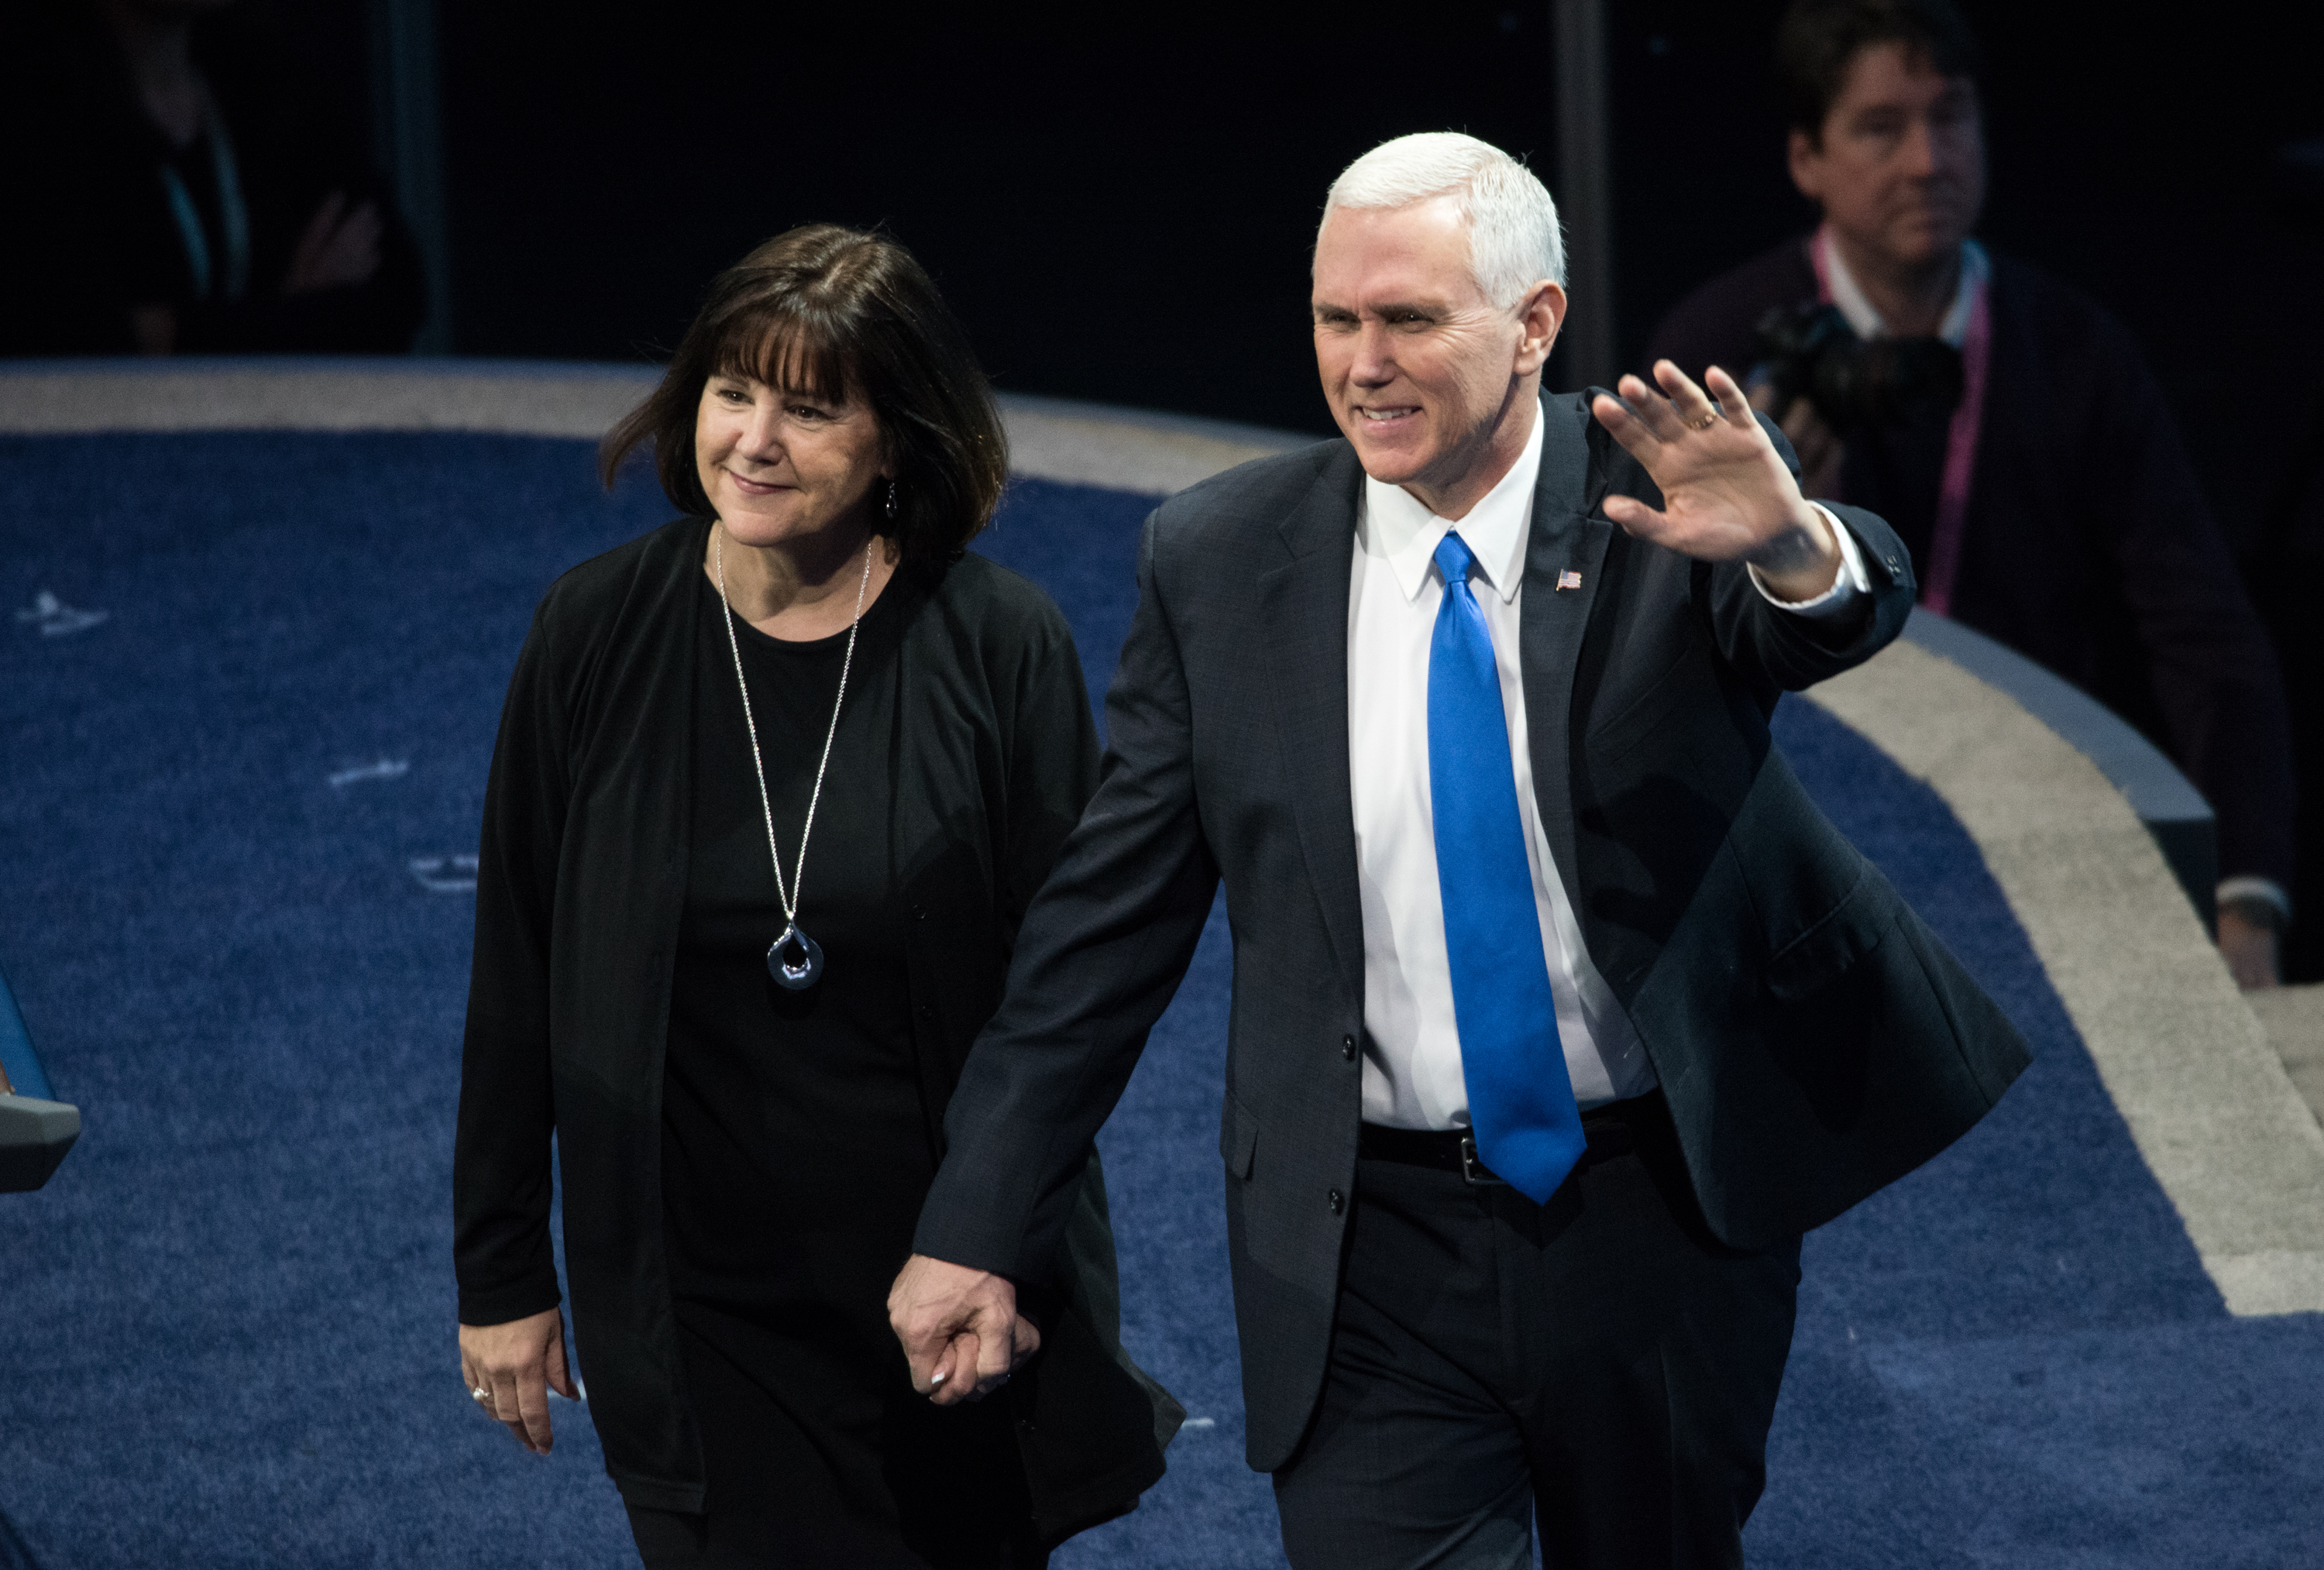 U.S. Vice President Mike Pence, right, and his wife Karen Pence are introduced at the the AIPAC 2017 Convention on March 26, 2017, in Washington, D.C. (Noam Galai&mdash;Getty Images)